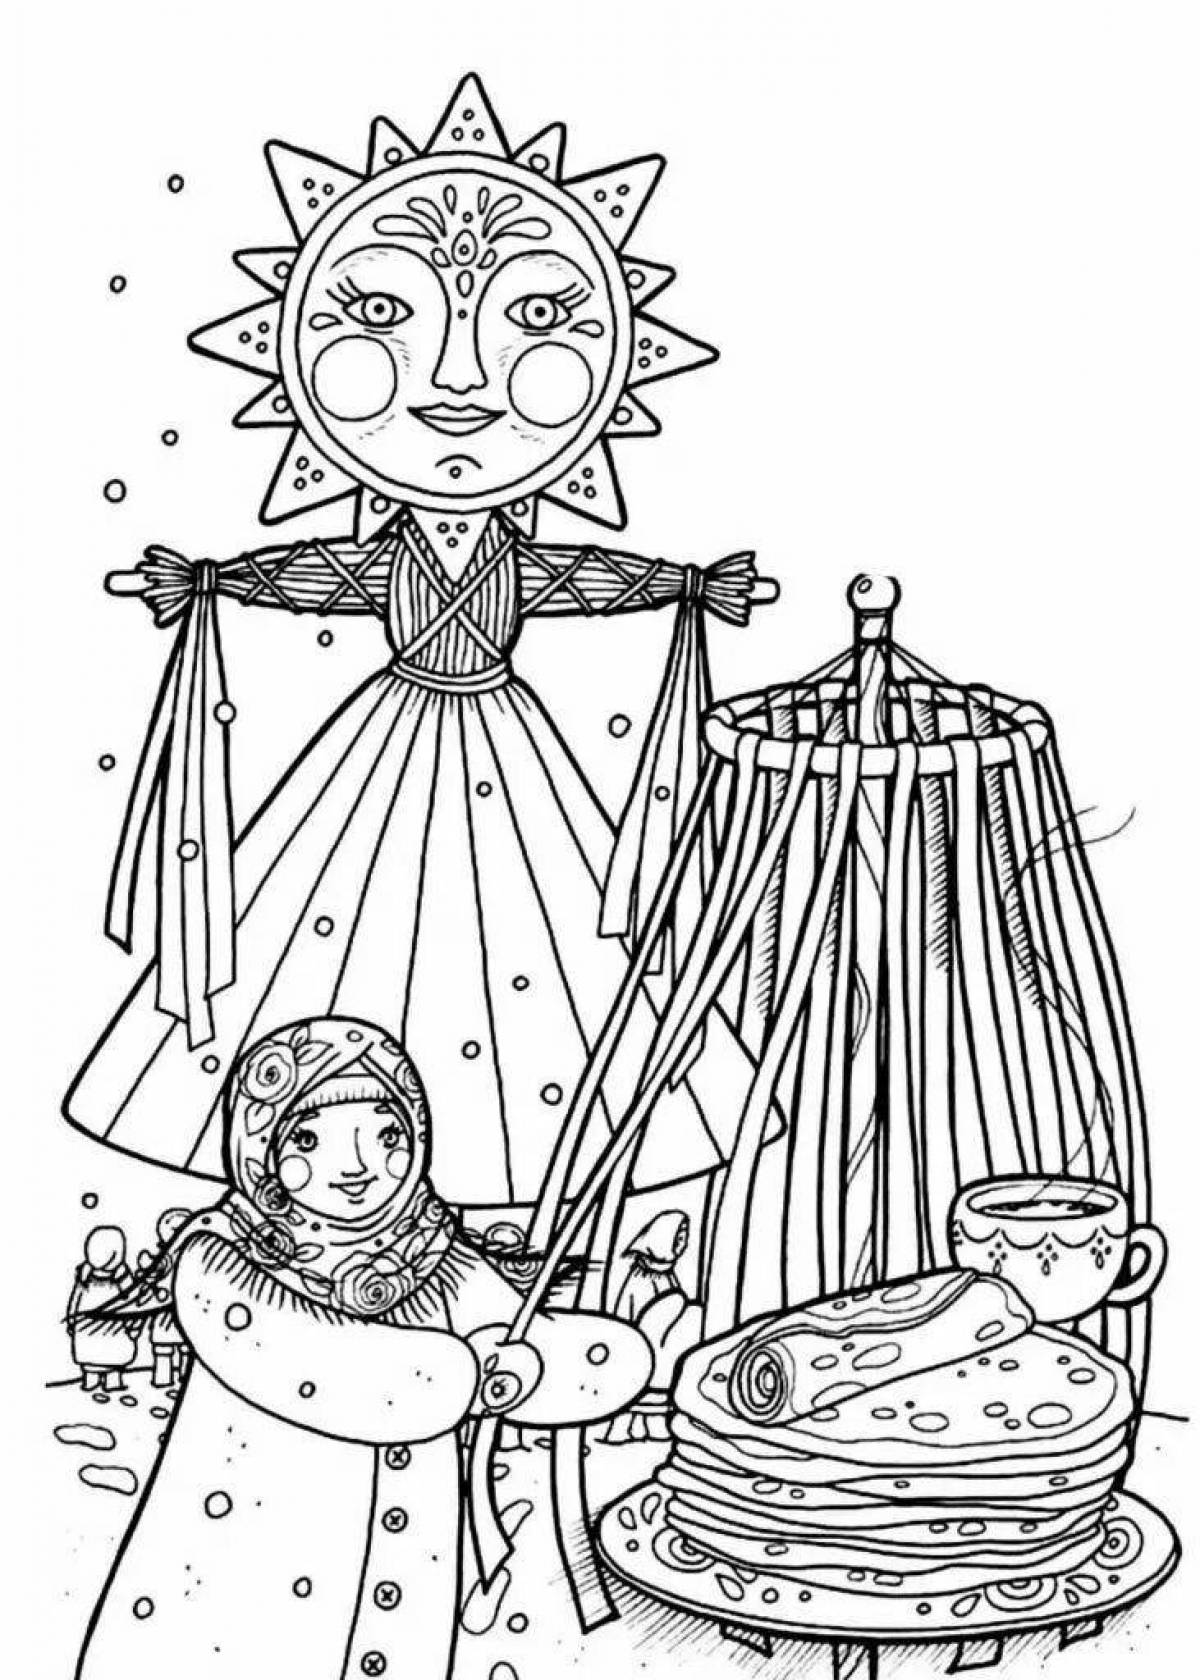 Shrove Tuesday coloring page